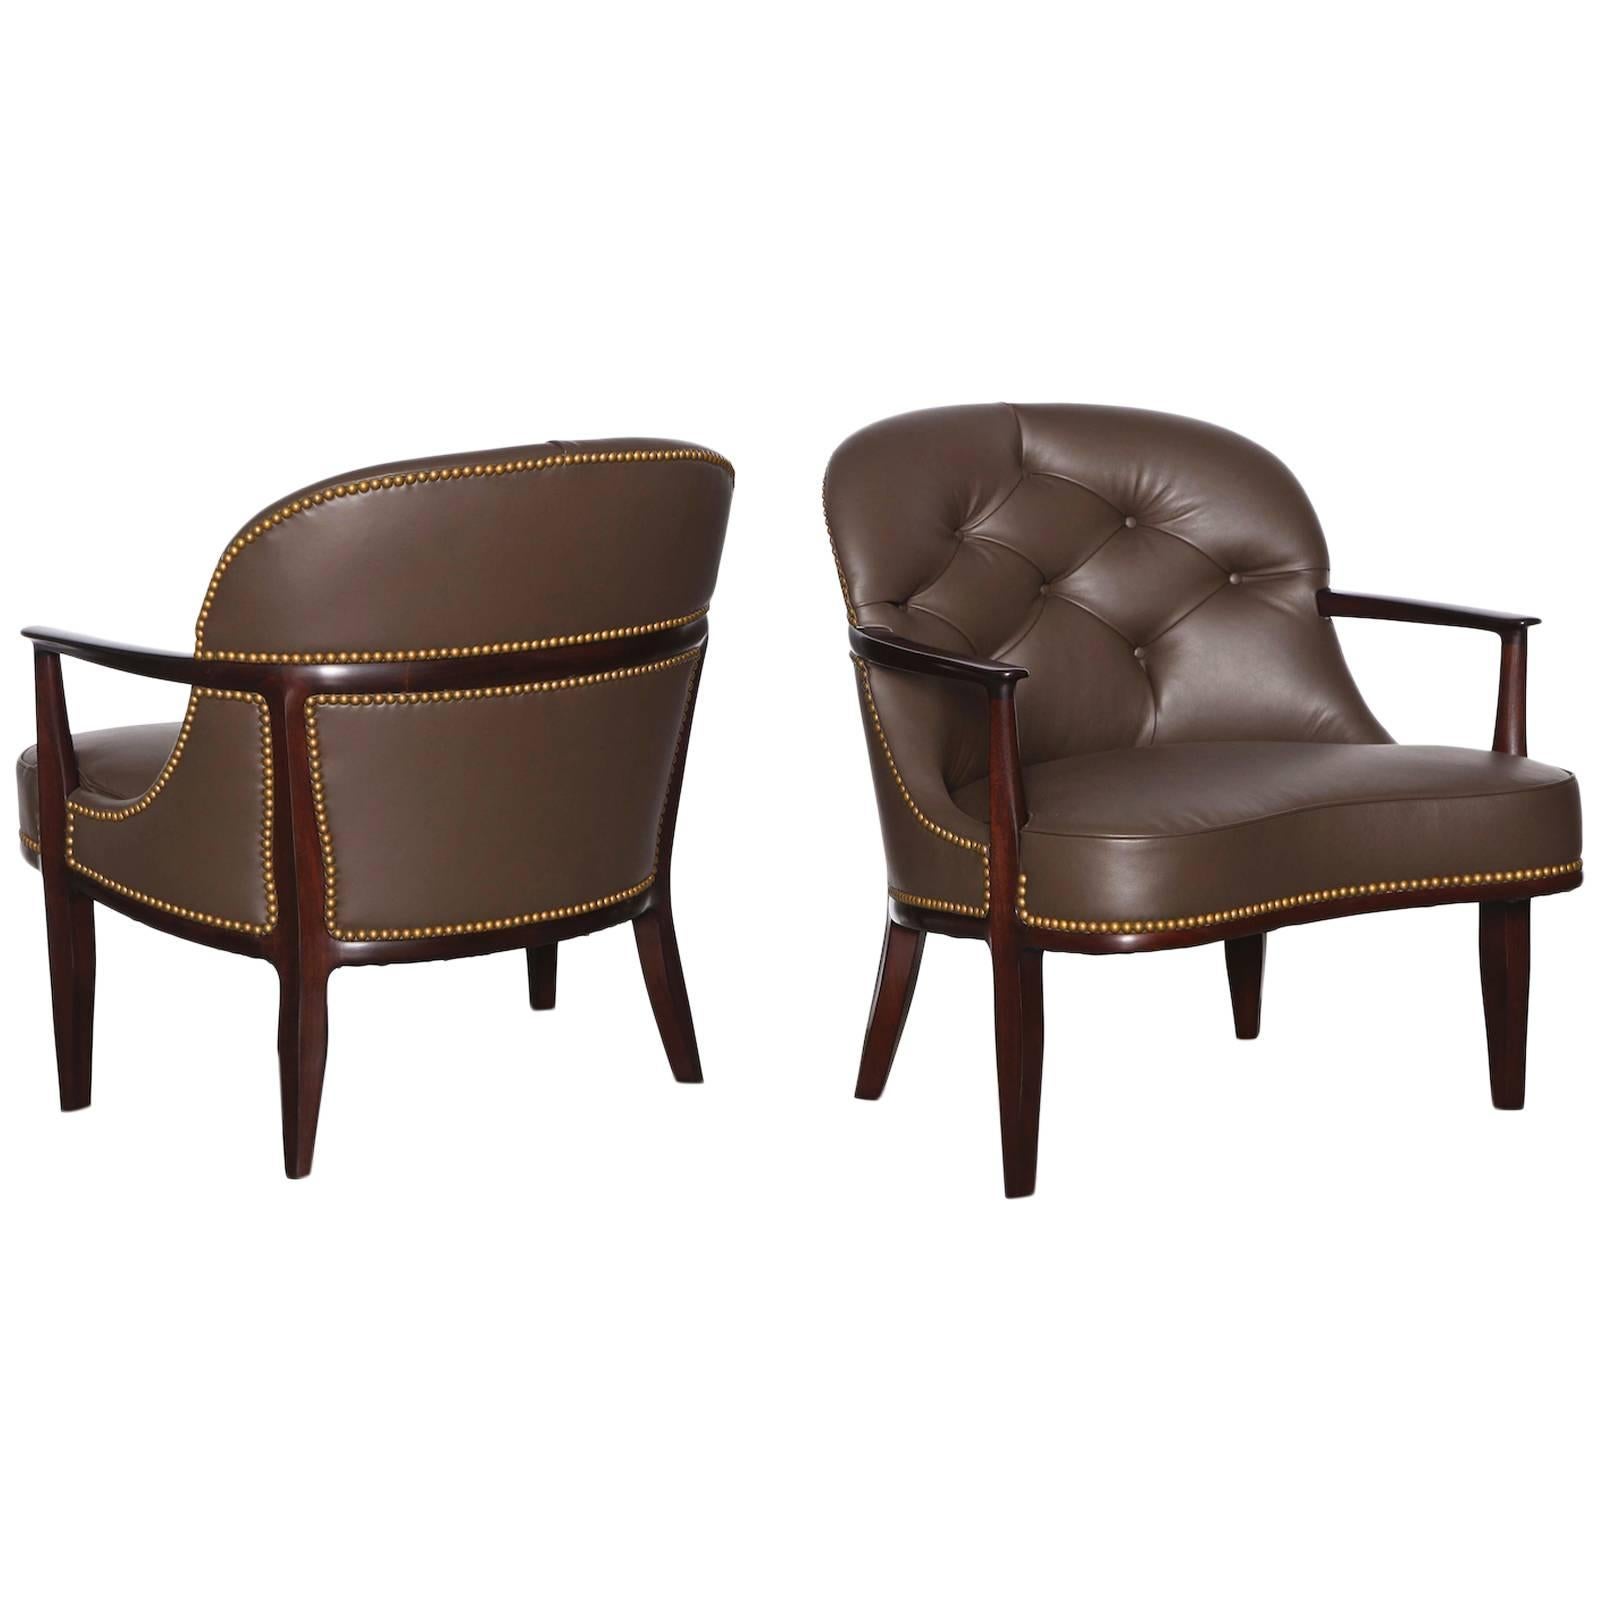 Pair of Low Lounge Chairs #5705 Edward Wormley for Dunbar